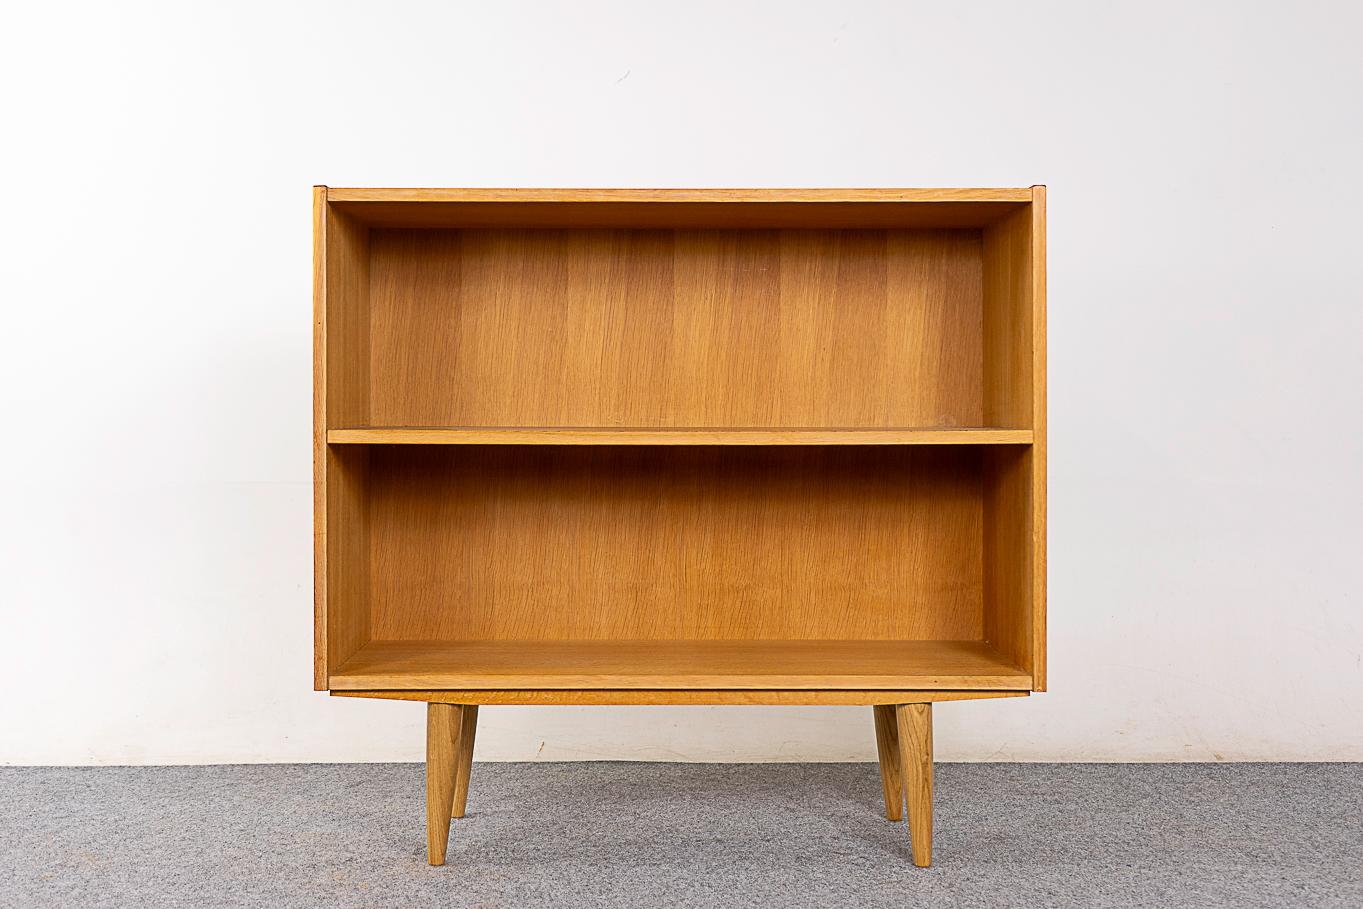 Oak Danish bookcase, circa 1960's. Sleek, low profile lines with fixed height shelf. Bookmatched veneer and solid removable tapered legs . Slim compact size for the modern condo.

Unrestored item with option to purchase in restored condition for an